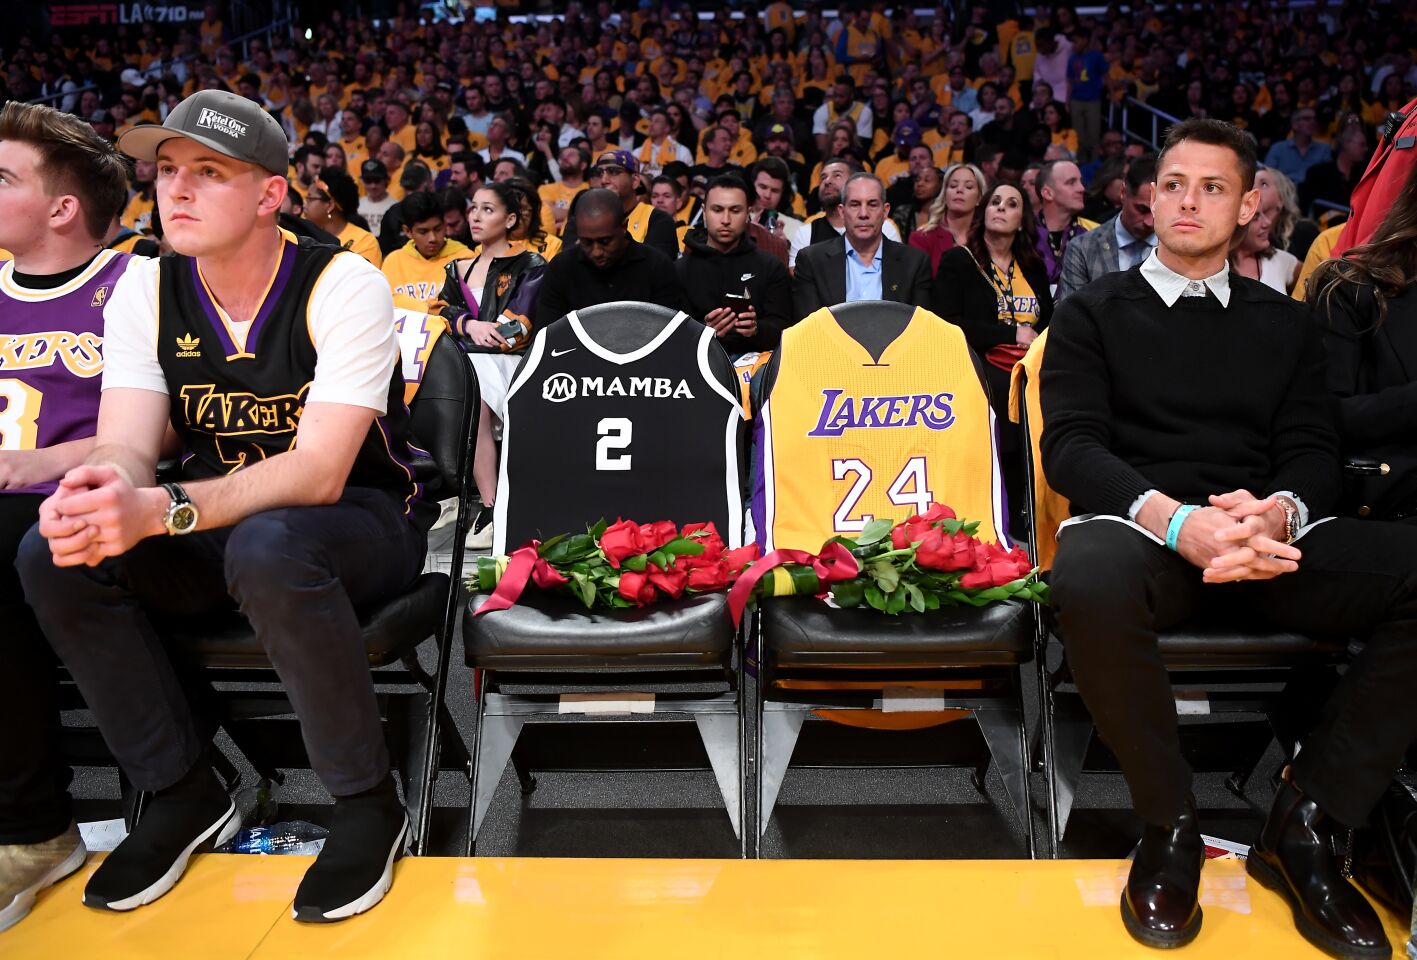 Fans sit next to empty seats held in honor of Kobe Bryant and his daughter Gianna at Staples Center on Jan. 31, 2020.